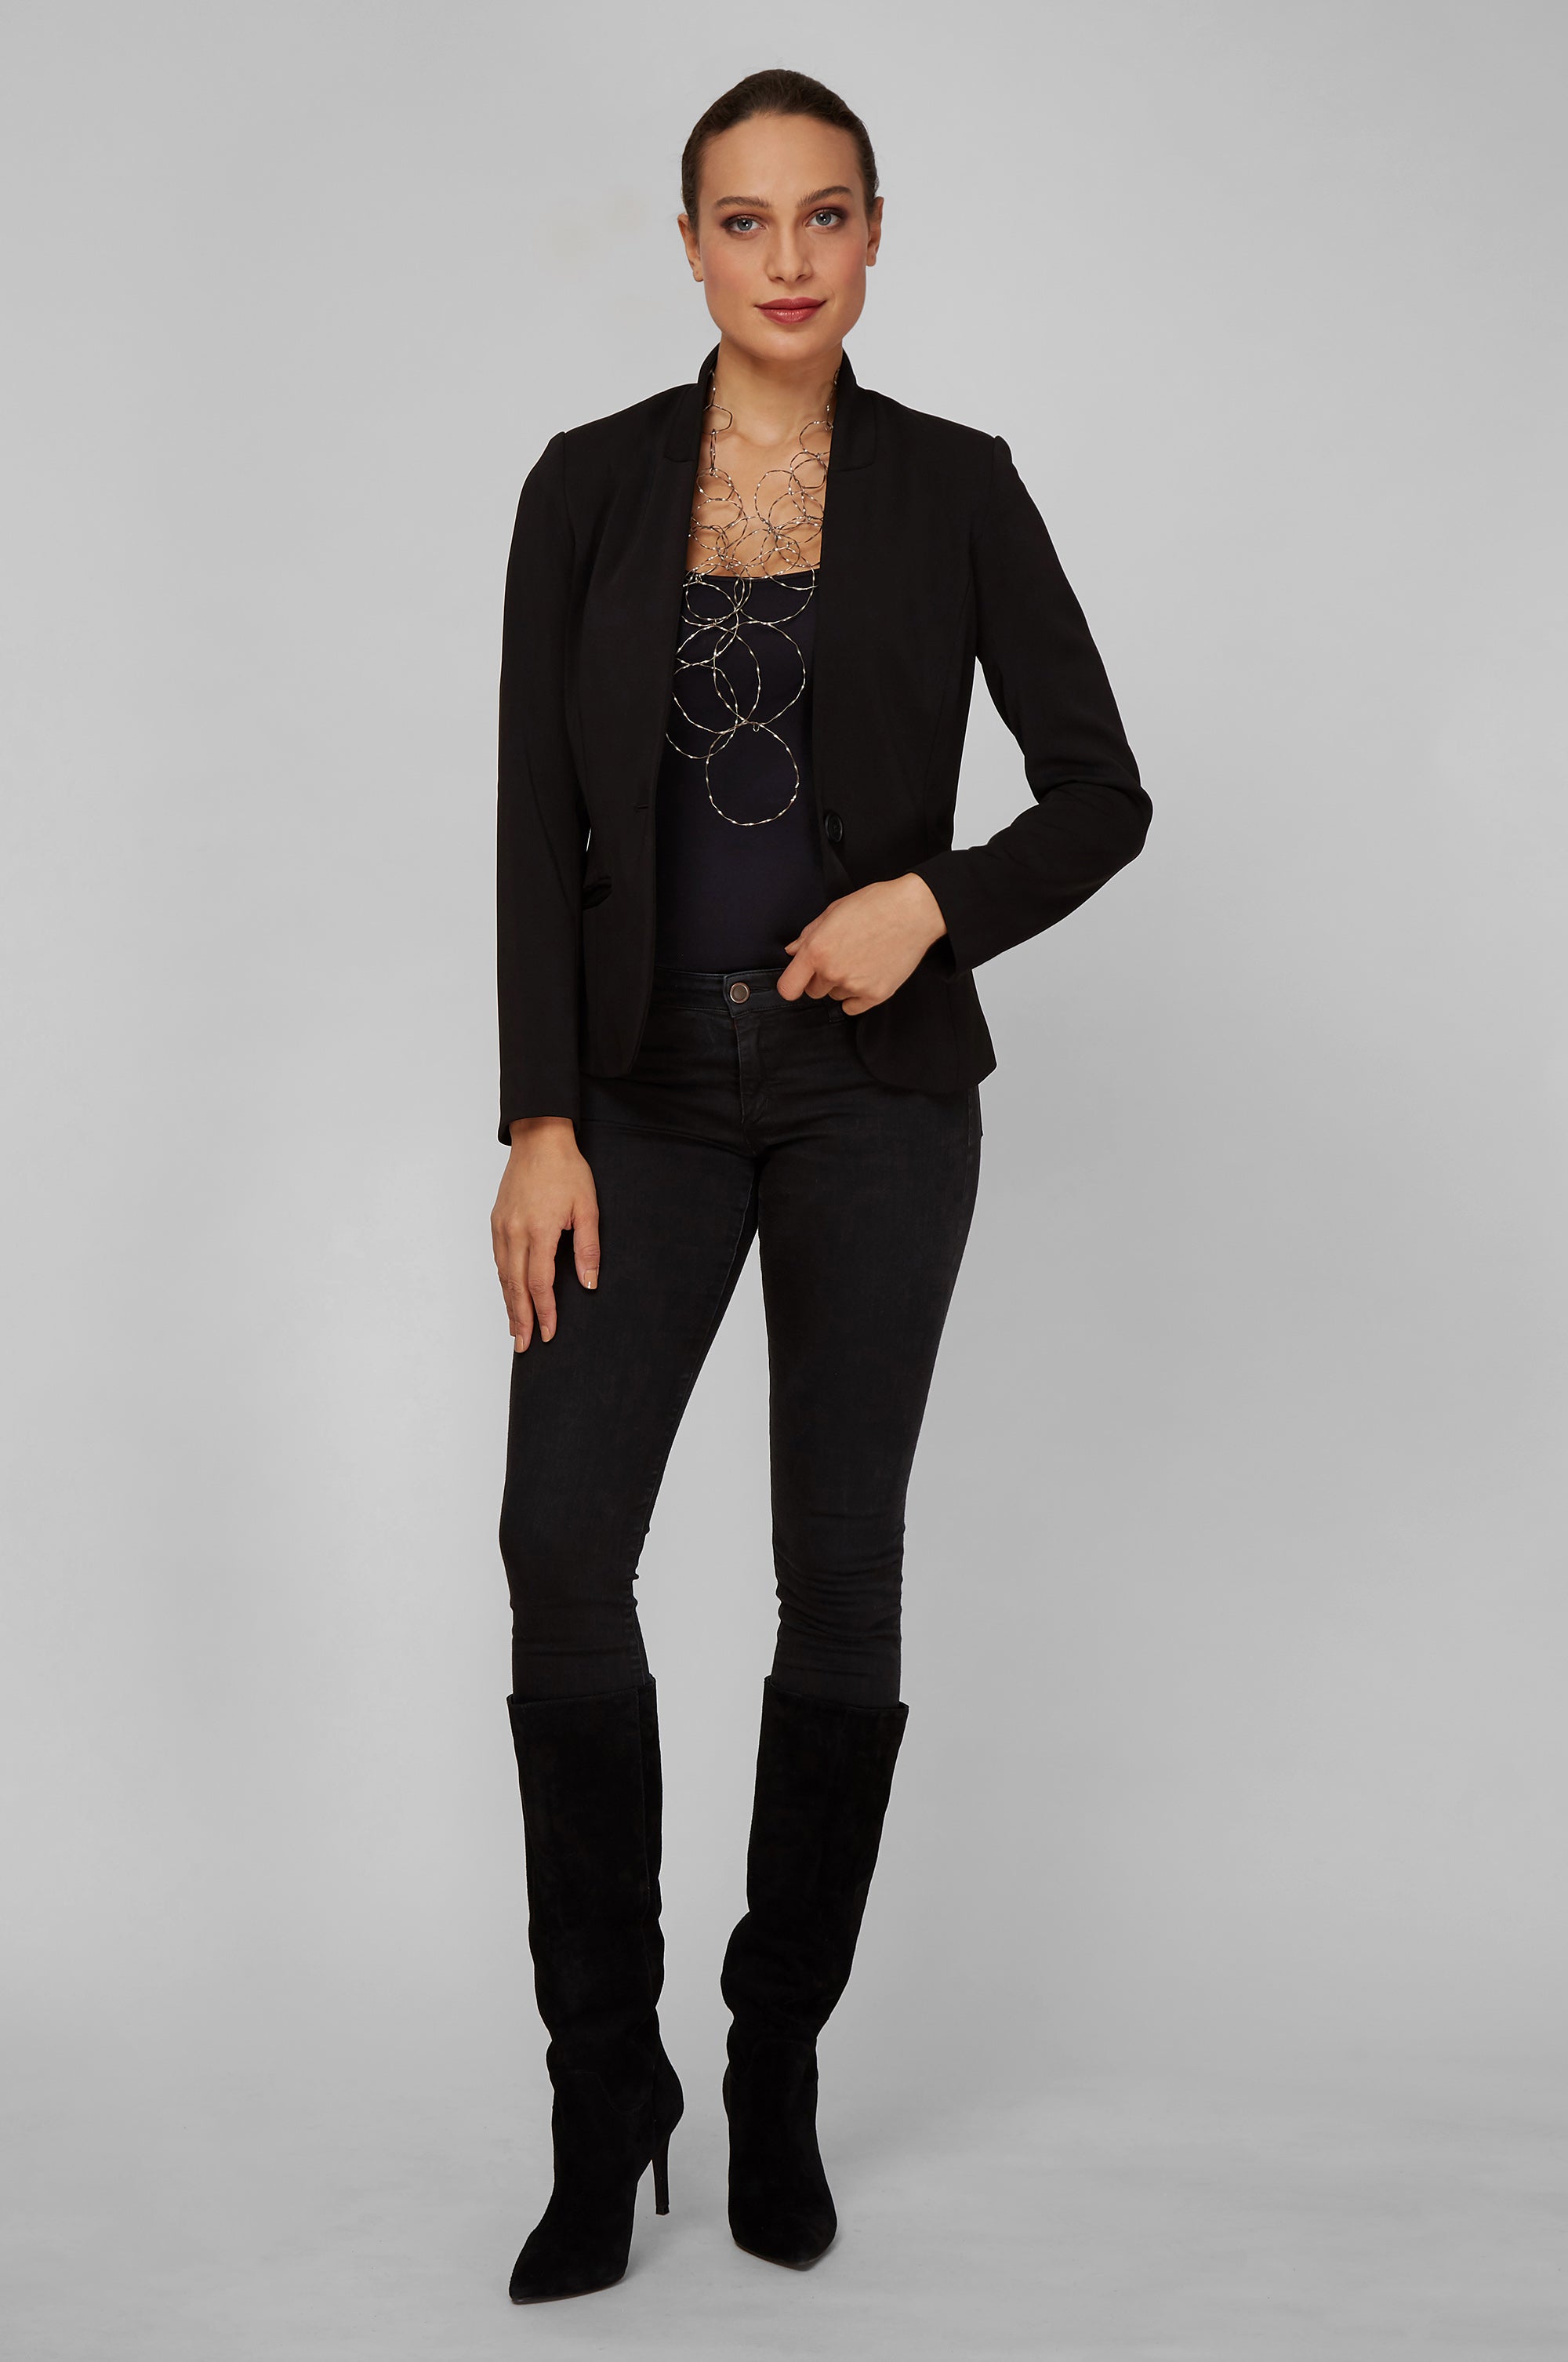 Women' Business Alanna Blazer - Black NORA GARDNER | OFFICIAL STORE for work and office